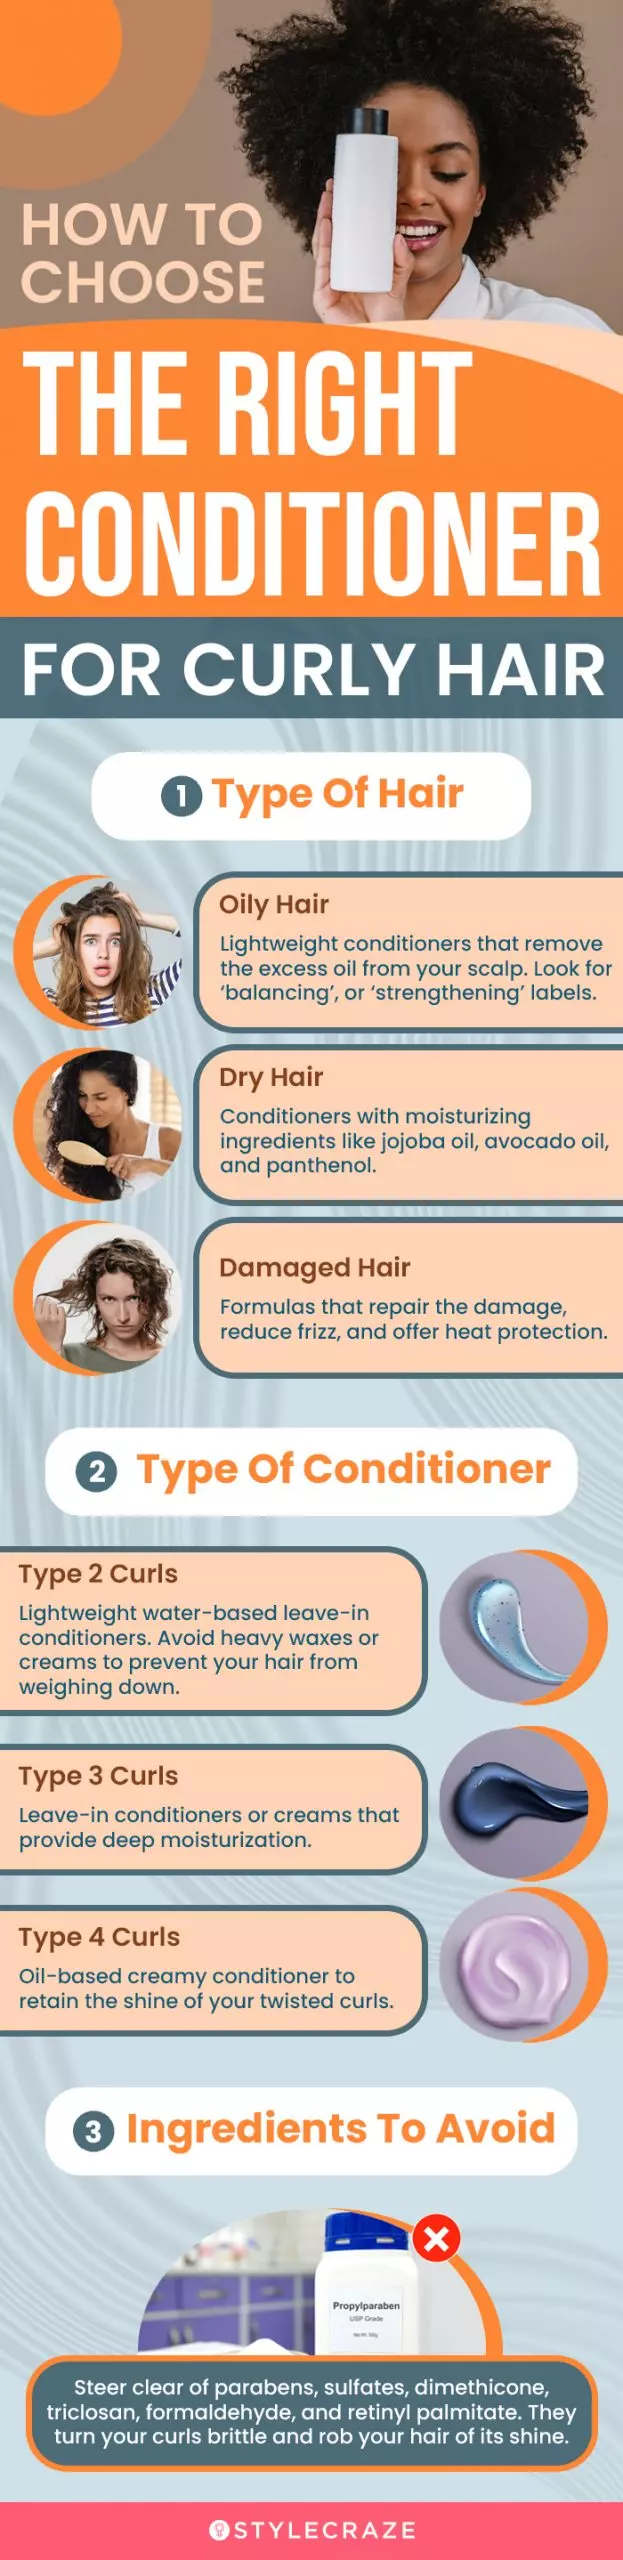 How To Choose The Right Conditioner For Curly Hair (infographic)